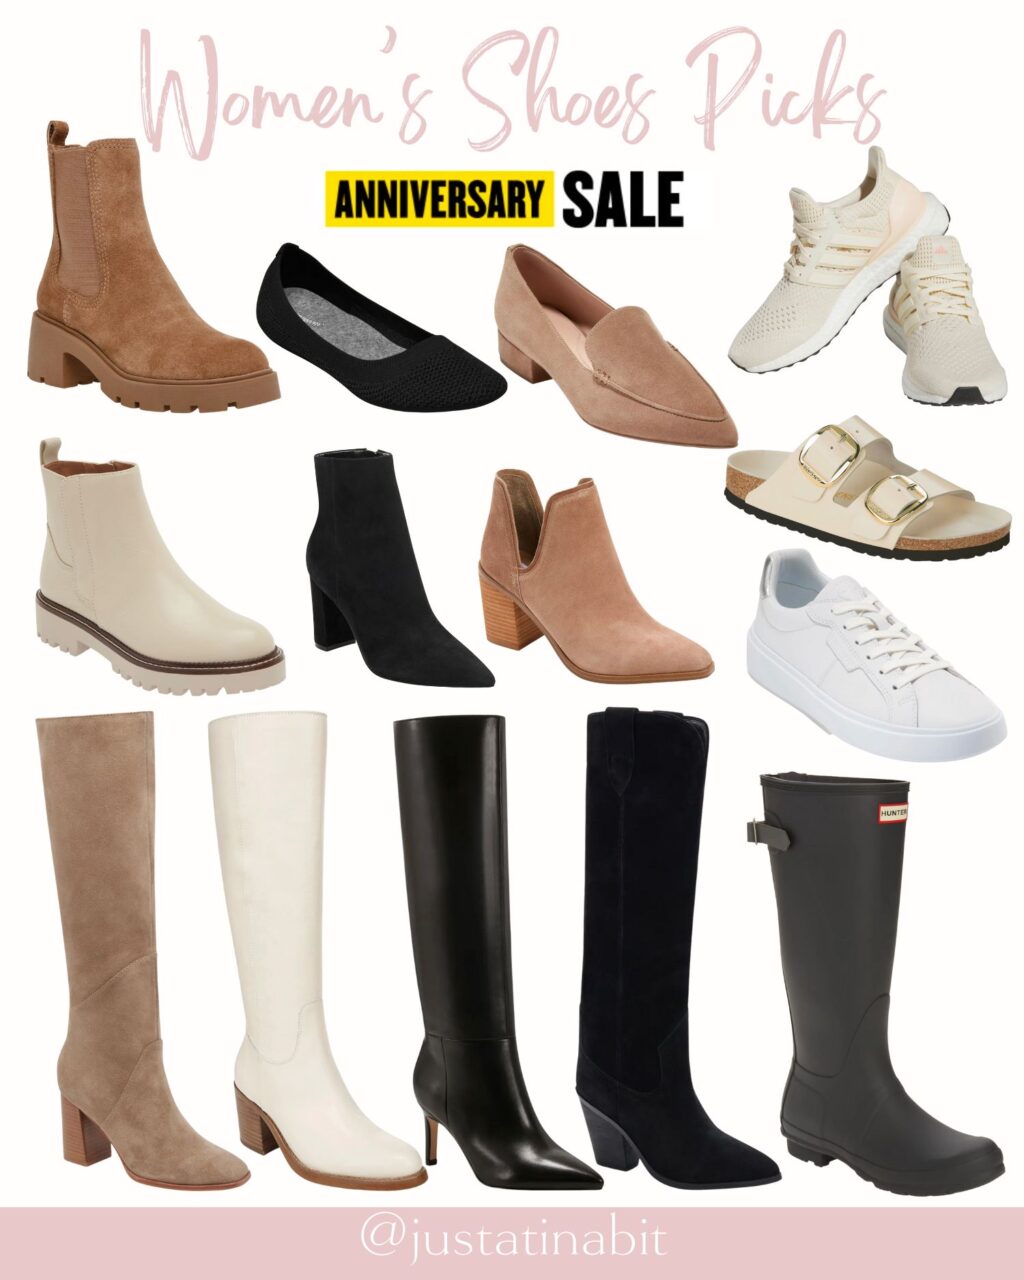 nordstrom anniversary sale 2023 shoes under $200, knee high boots, booties, waterproof boots, flats, tennis shoes, sneakers